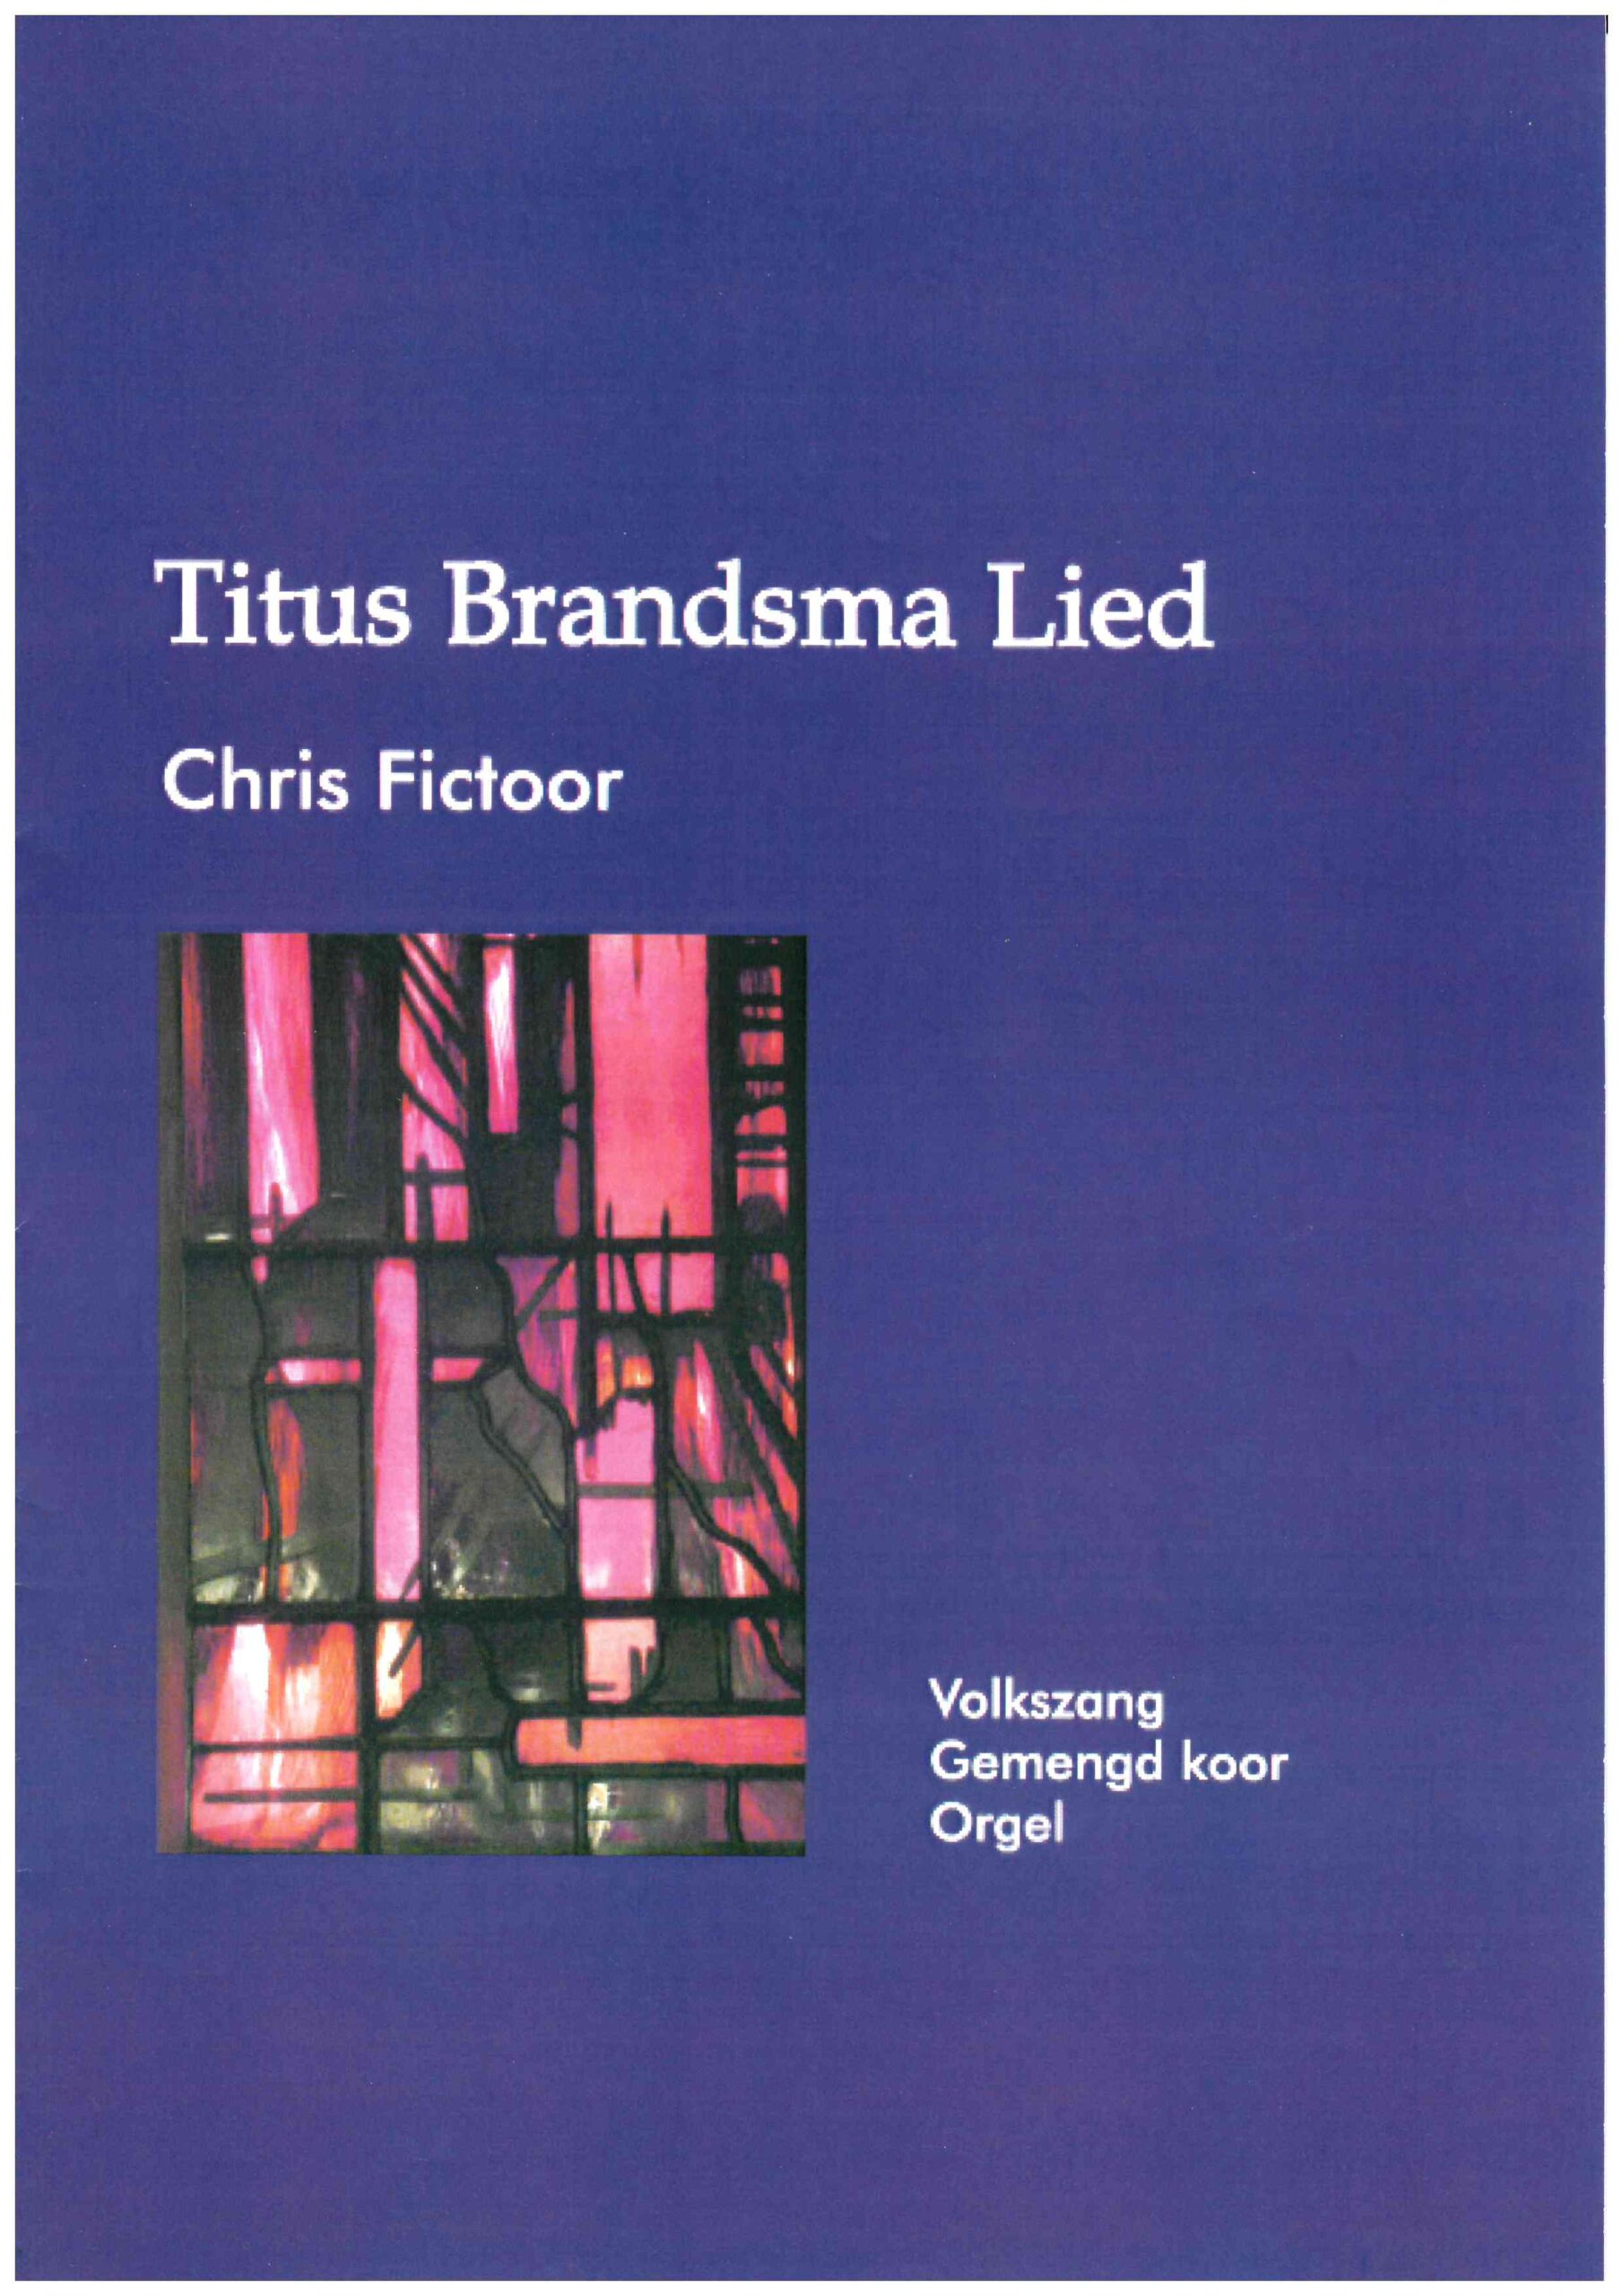 Titus Brandsma Lied scaled